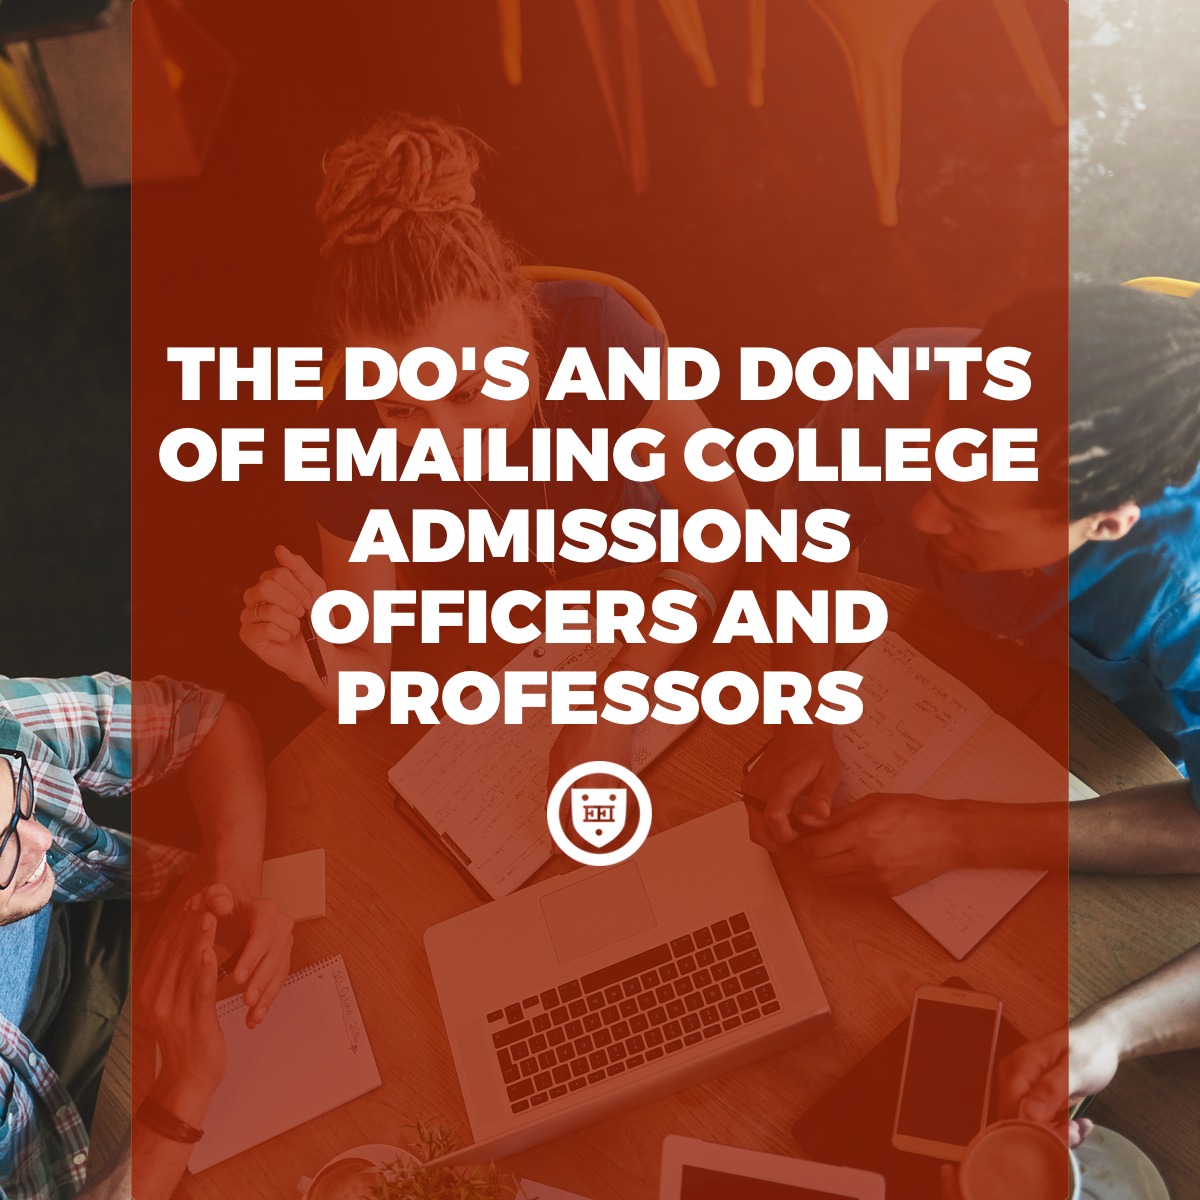 How to Effectively Communicate with College Admissions Officers via Email